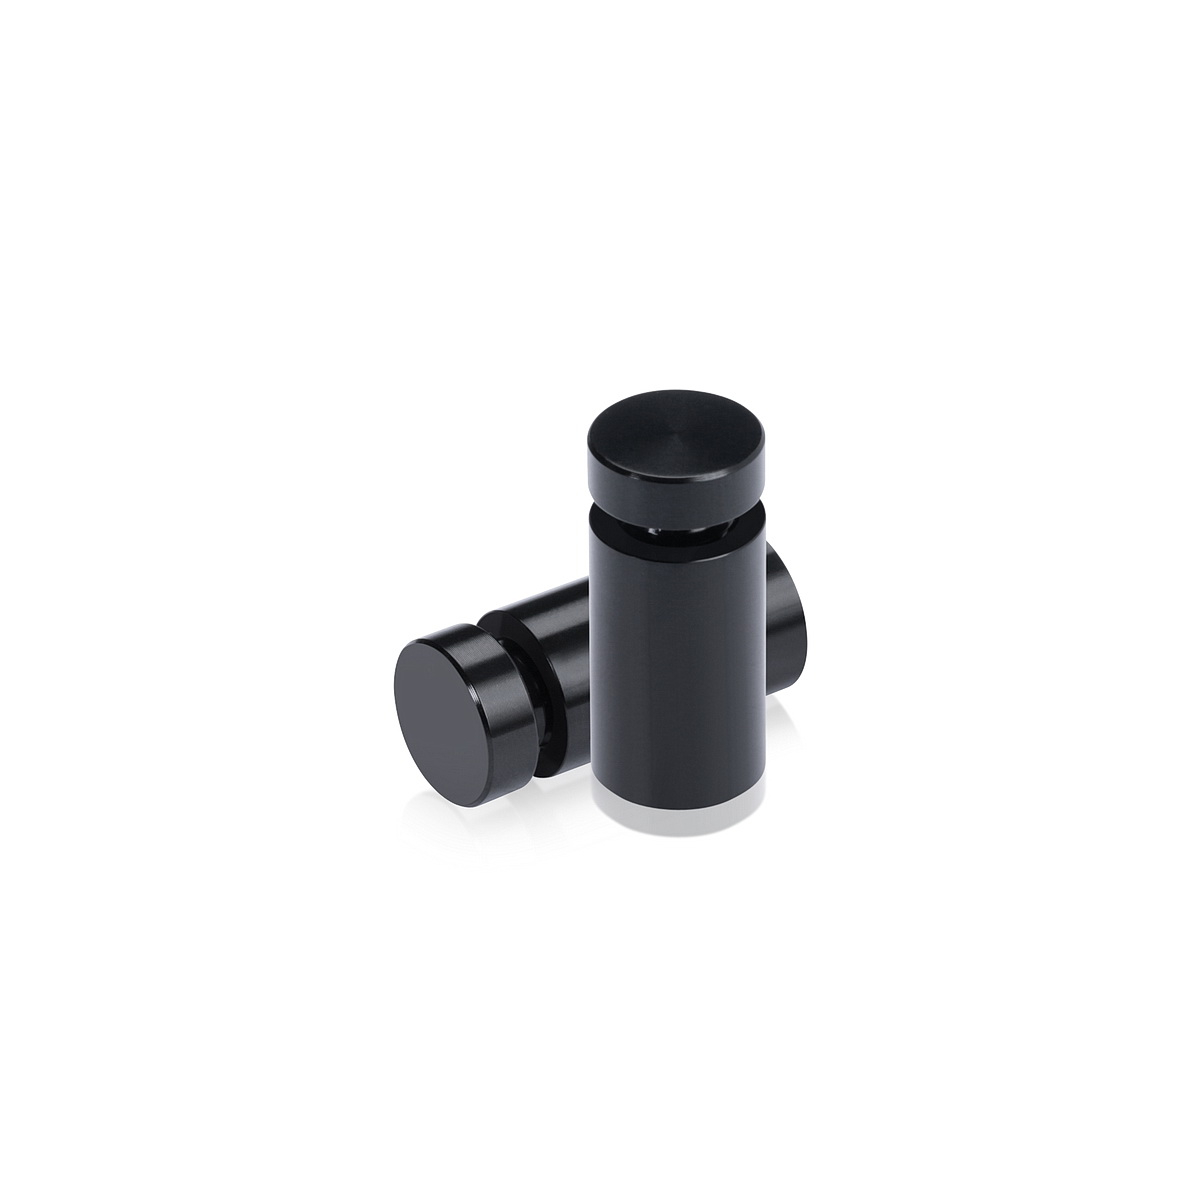 1/2'' Diameter X 3/4'' Barrel Length, Affordable Aluminum Standoffs, Black Anodized Finish Easy Fasten Standoff (For Inside / Outside use) [Required Material Hole Size: 3/8'']